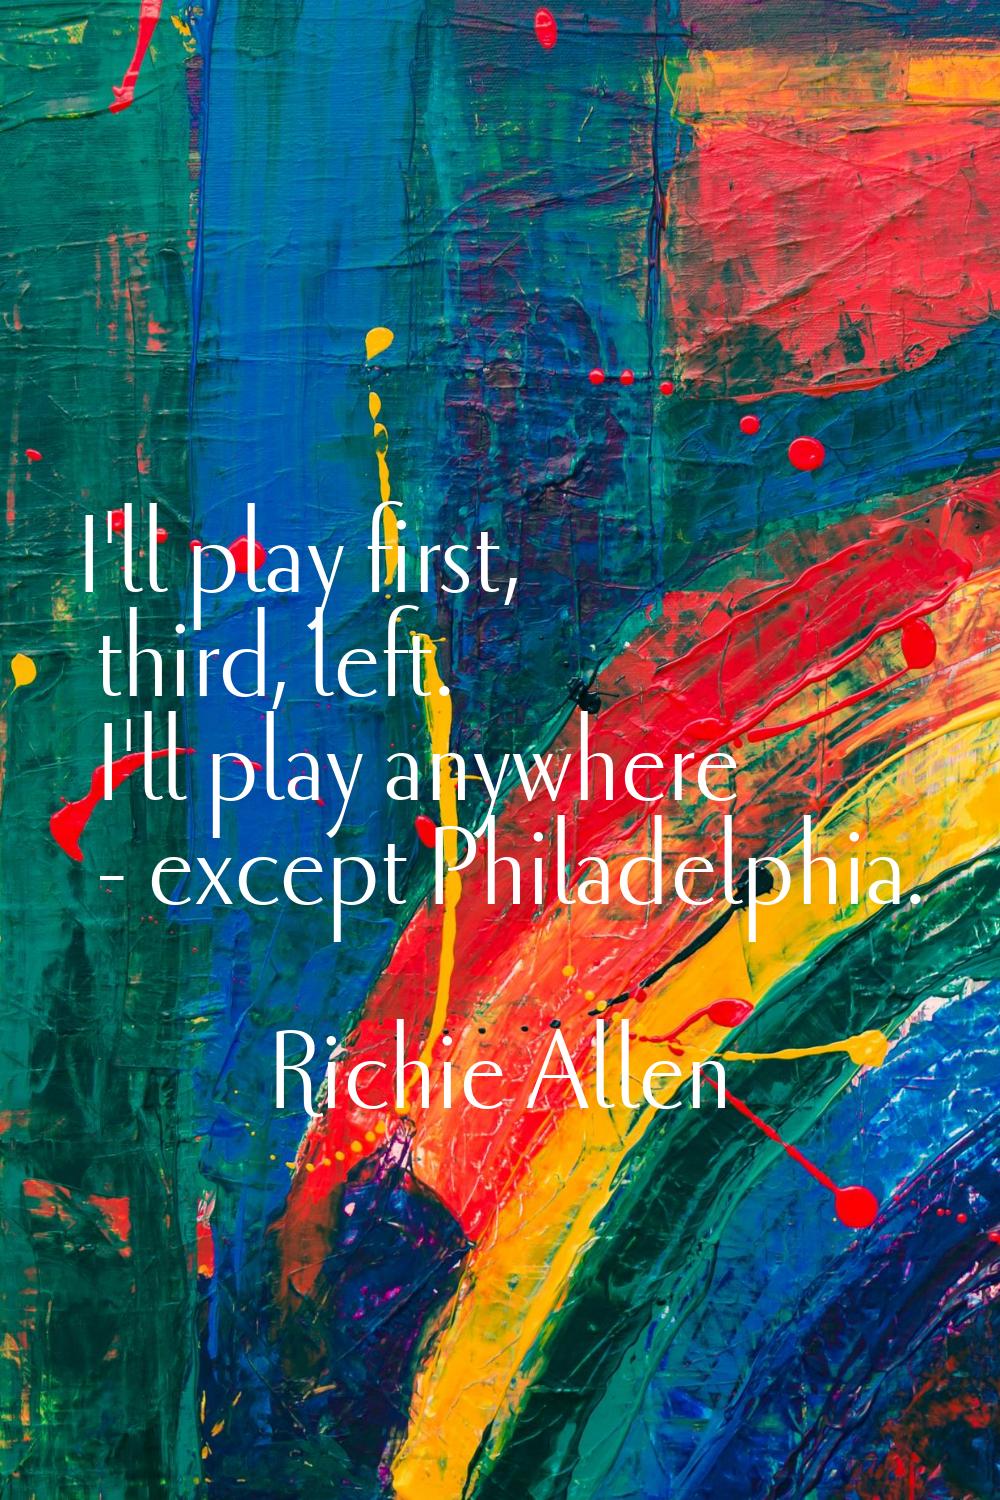 I'll play first, third, left. I'll play anywhere - except Philadelphia.